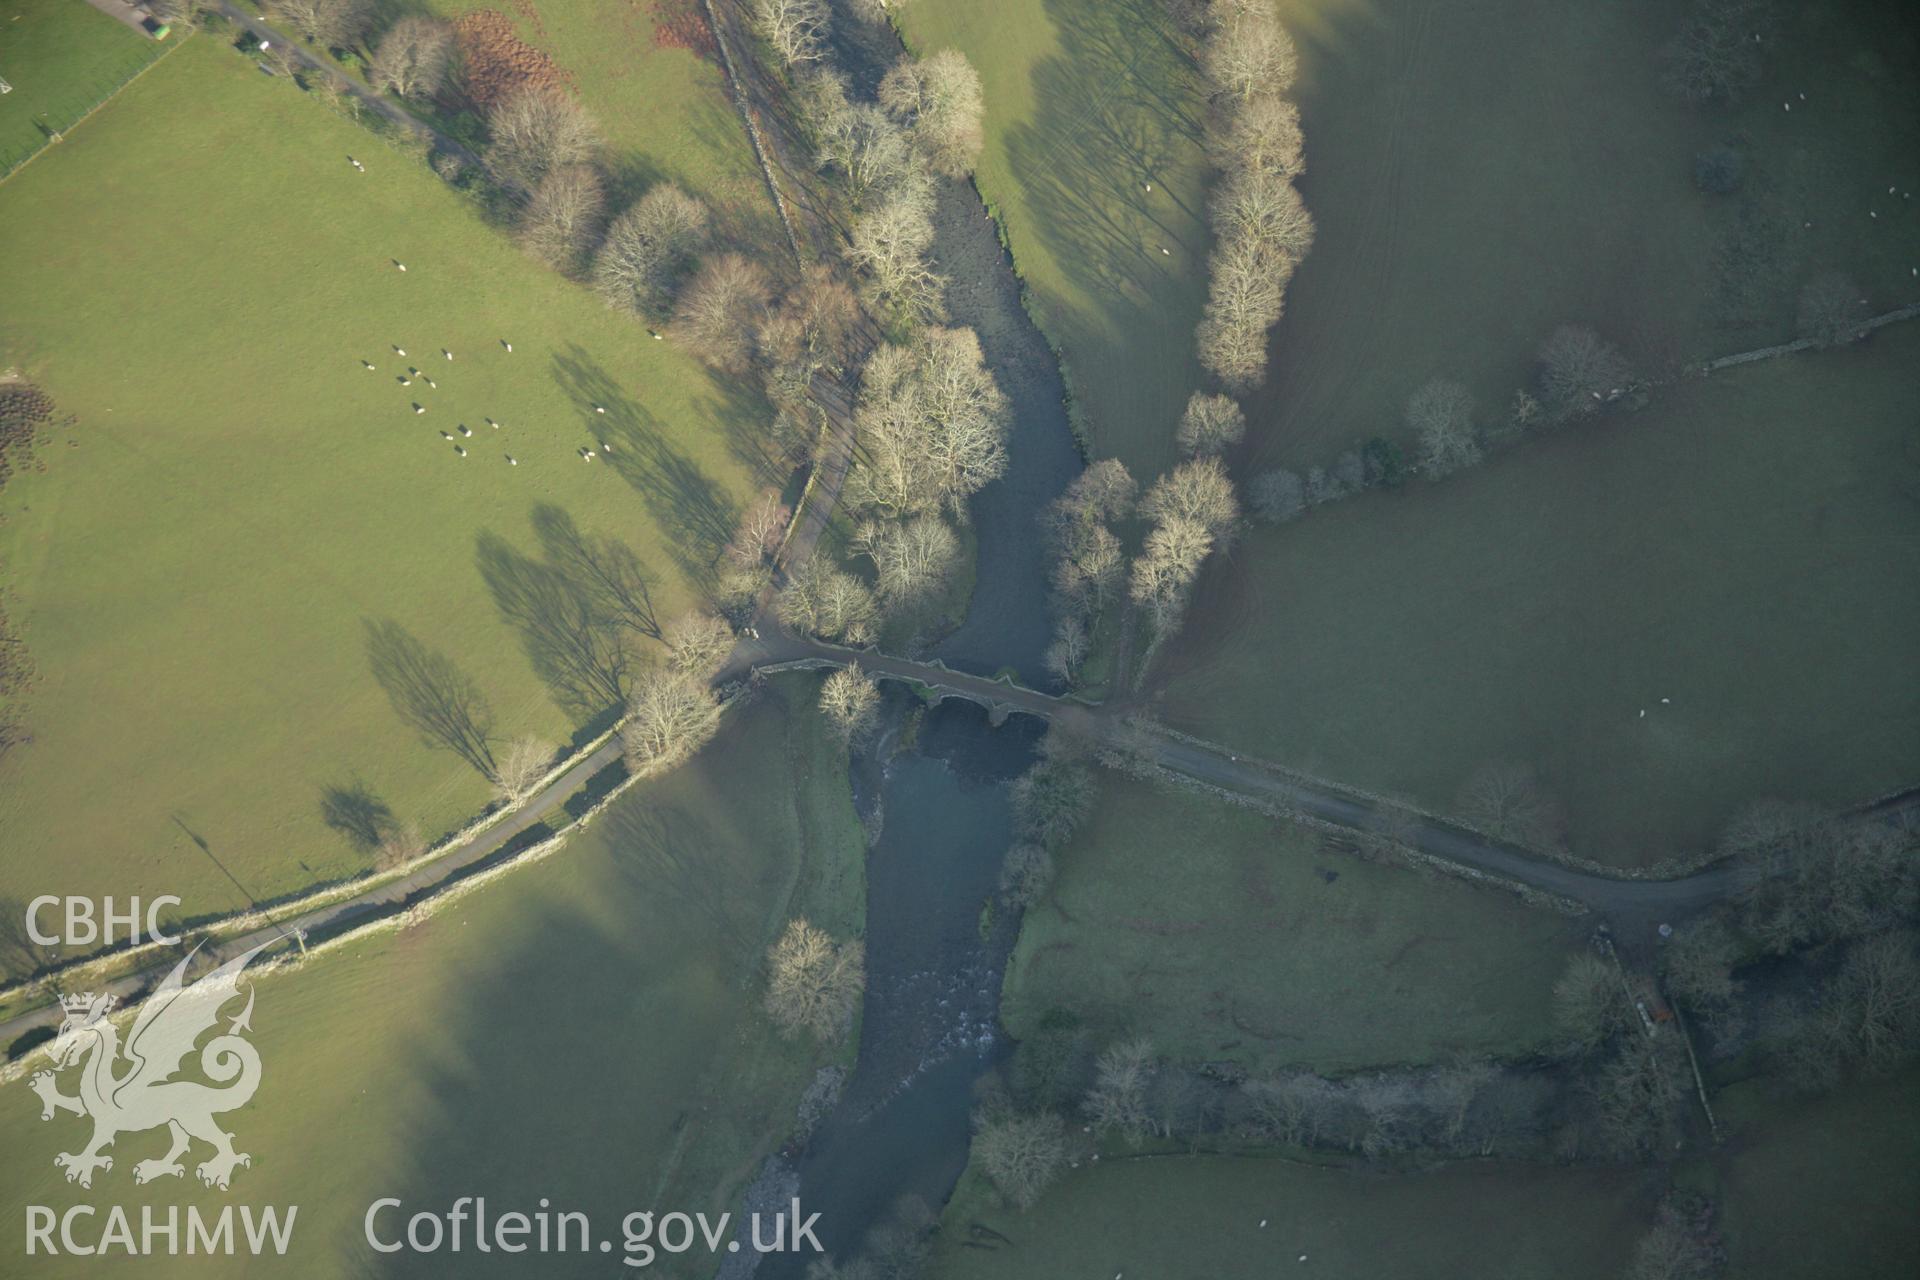 RCAHMW colour oblique aerial photograph of Pont Dol-y-Moch. Taken on 25 January 2007 by Toby Driver